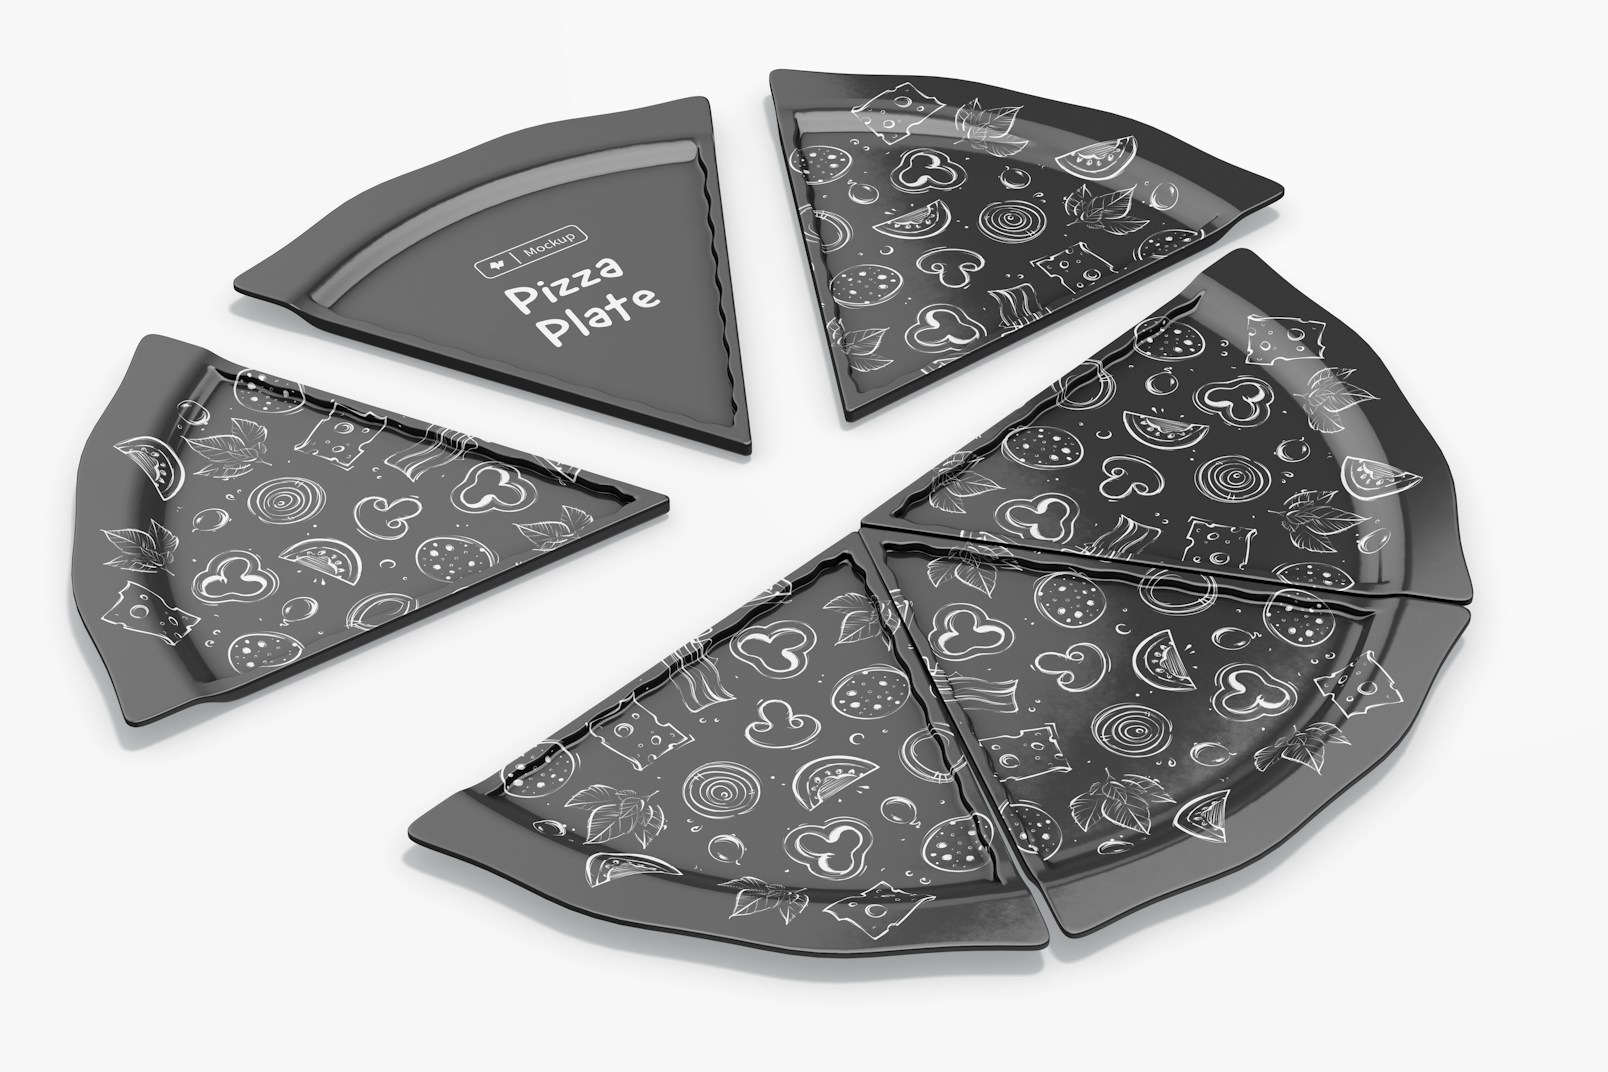 Pizza Plates Mockup, Perspective View 02